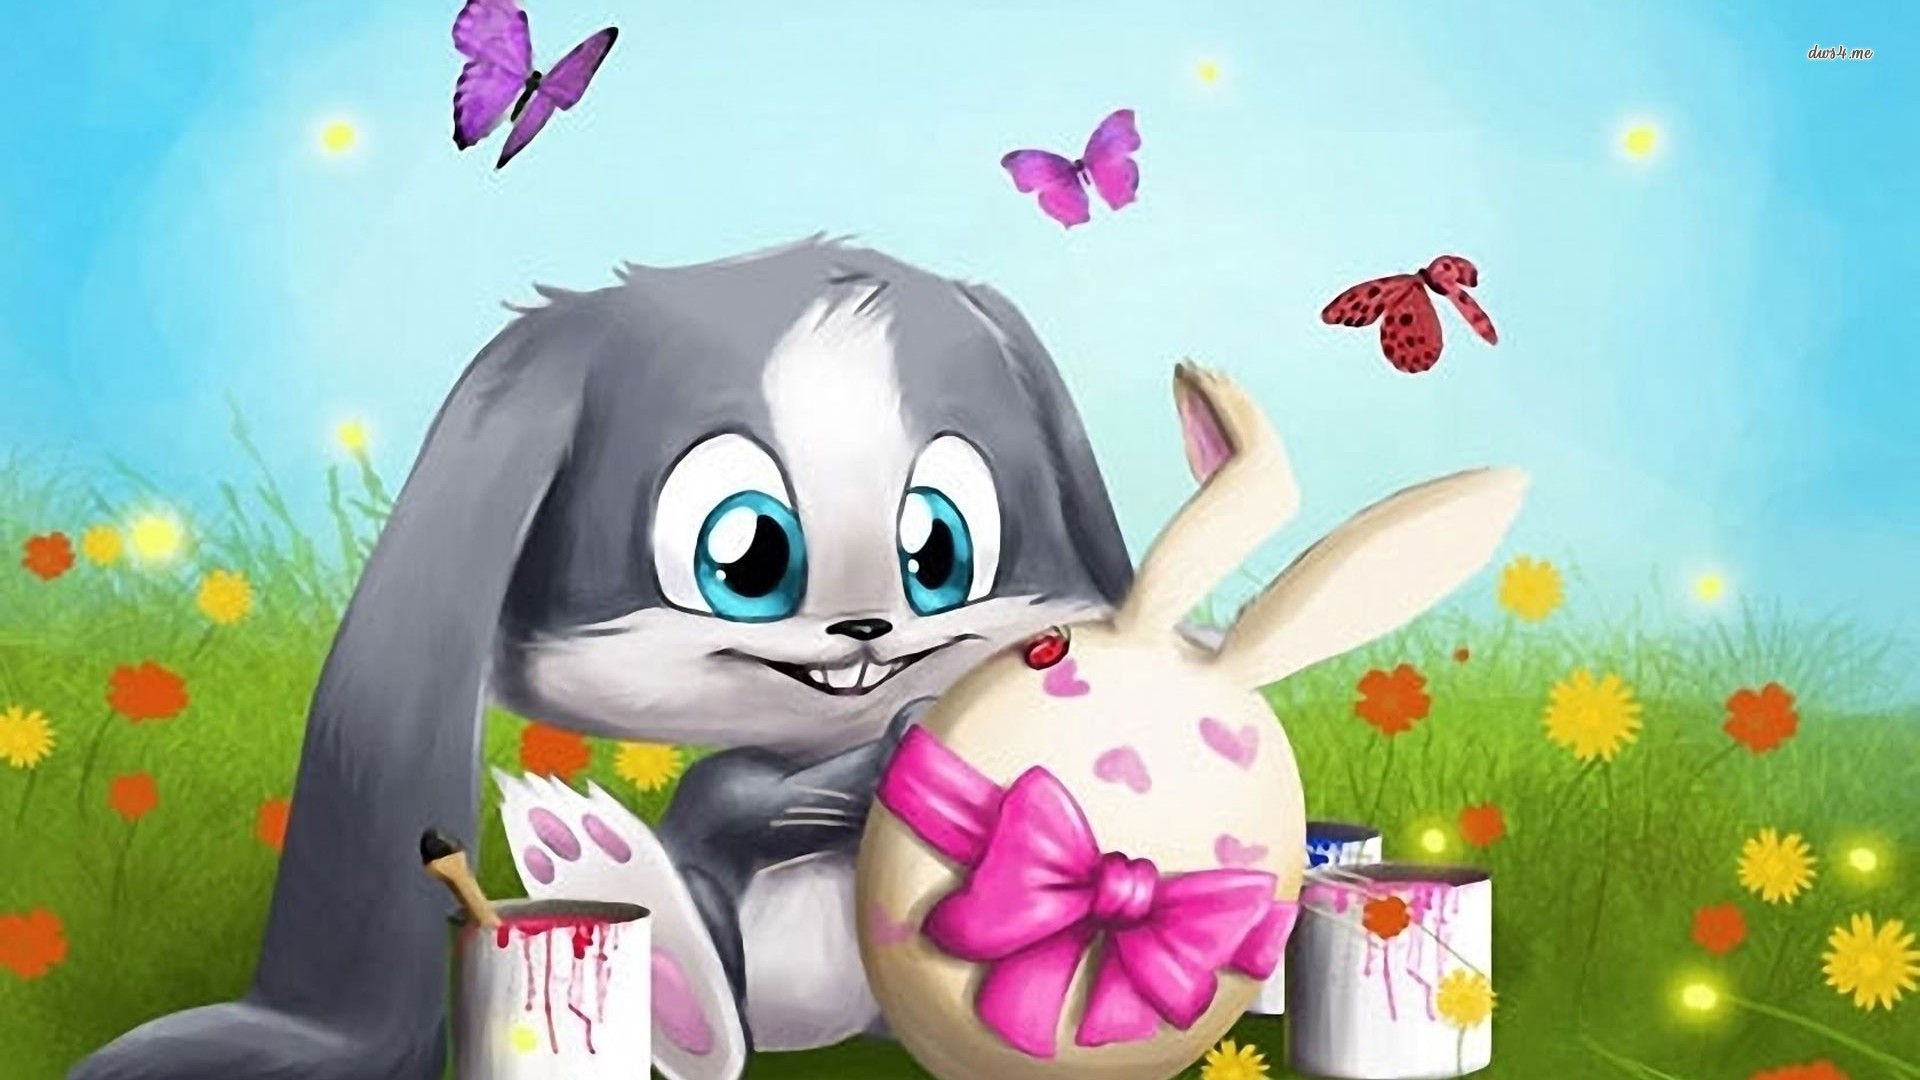 1920x1080 Download Happy Easter Cartoon Images Pictures & Wallpapers ...